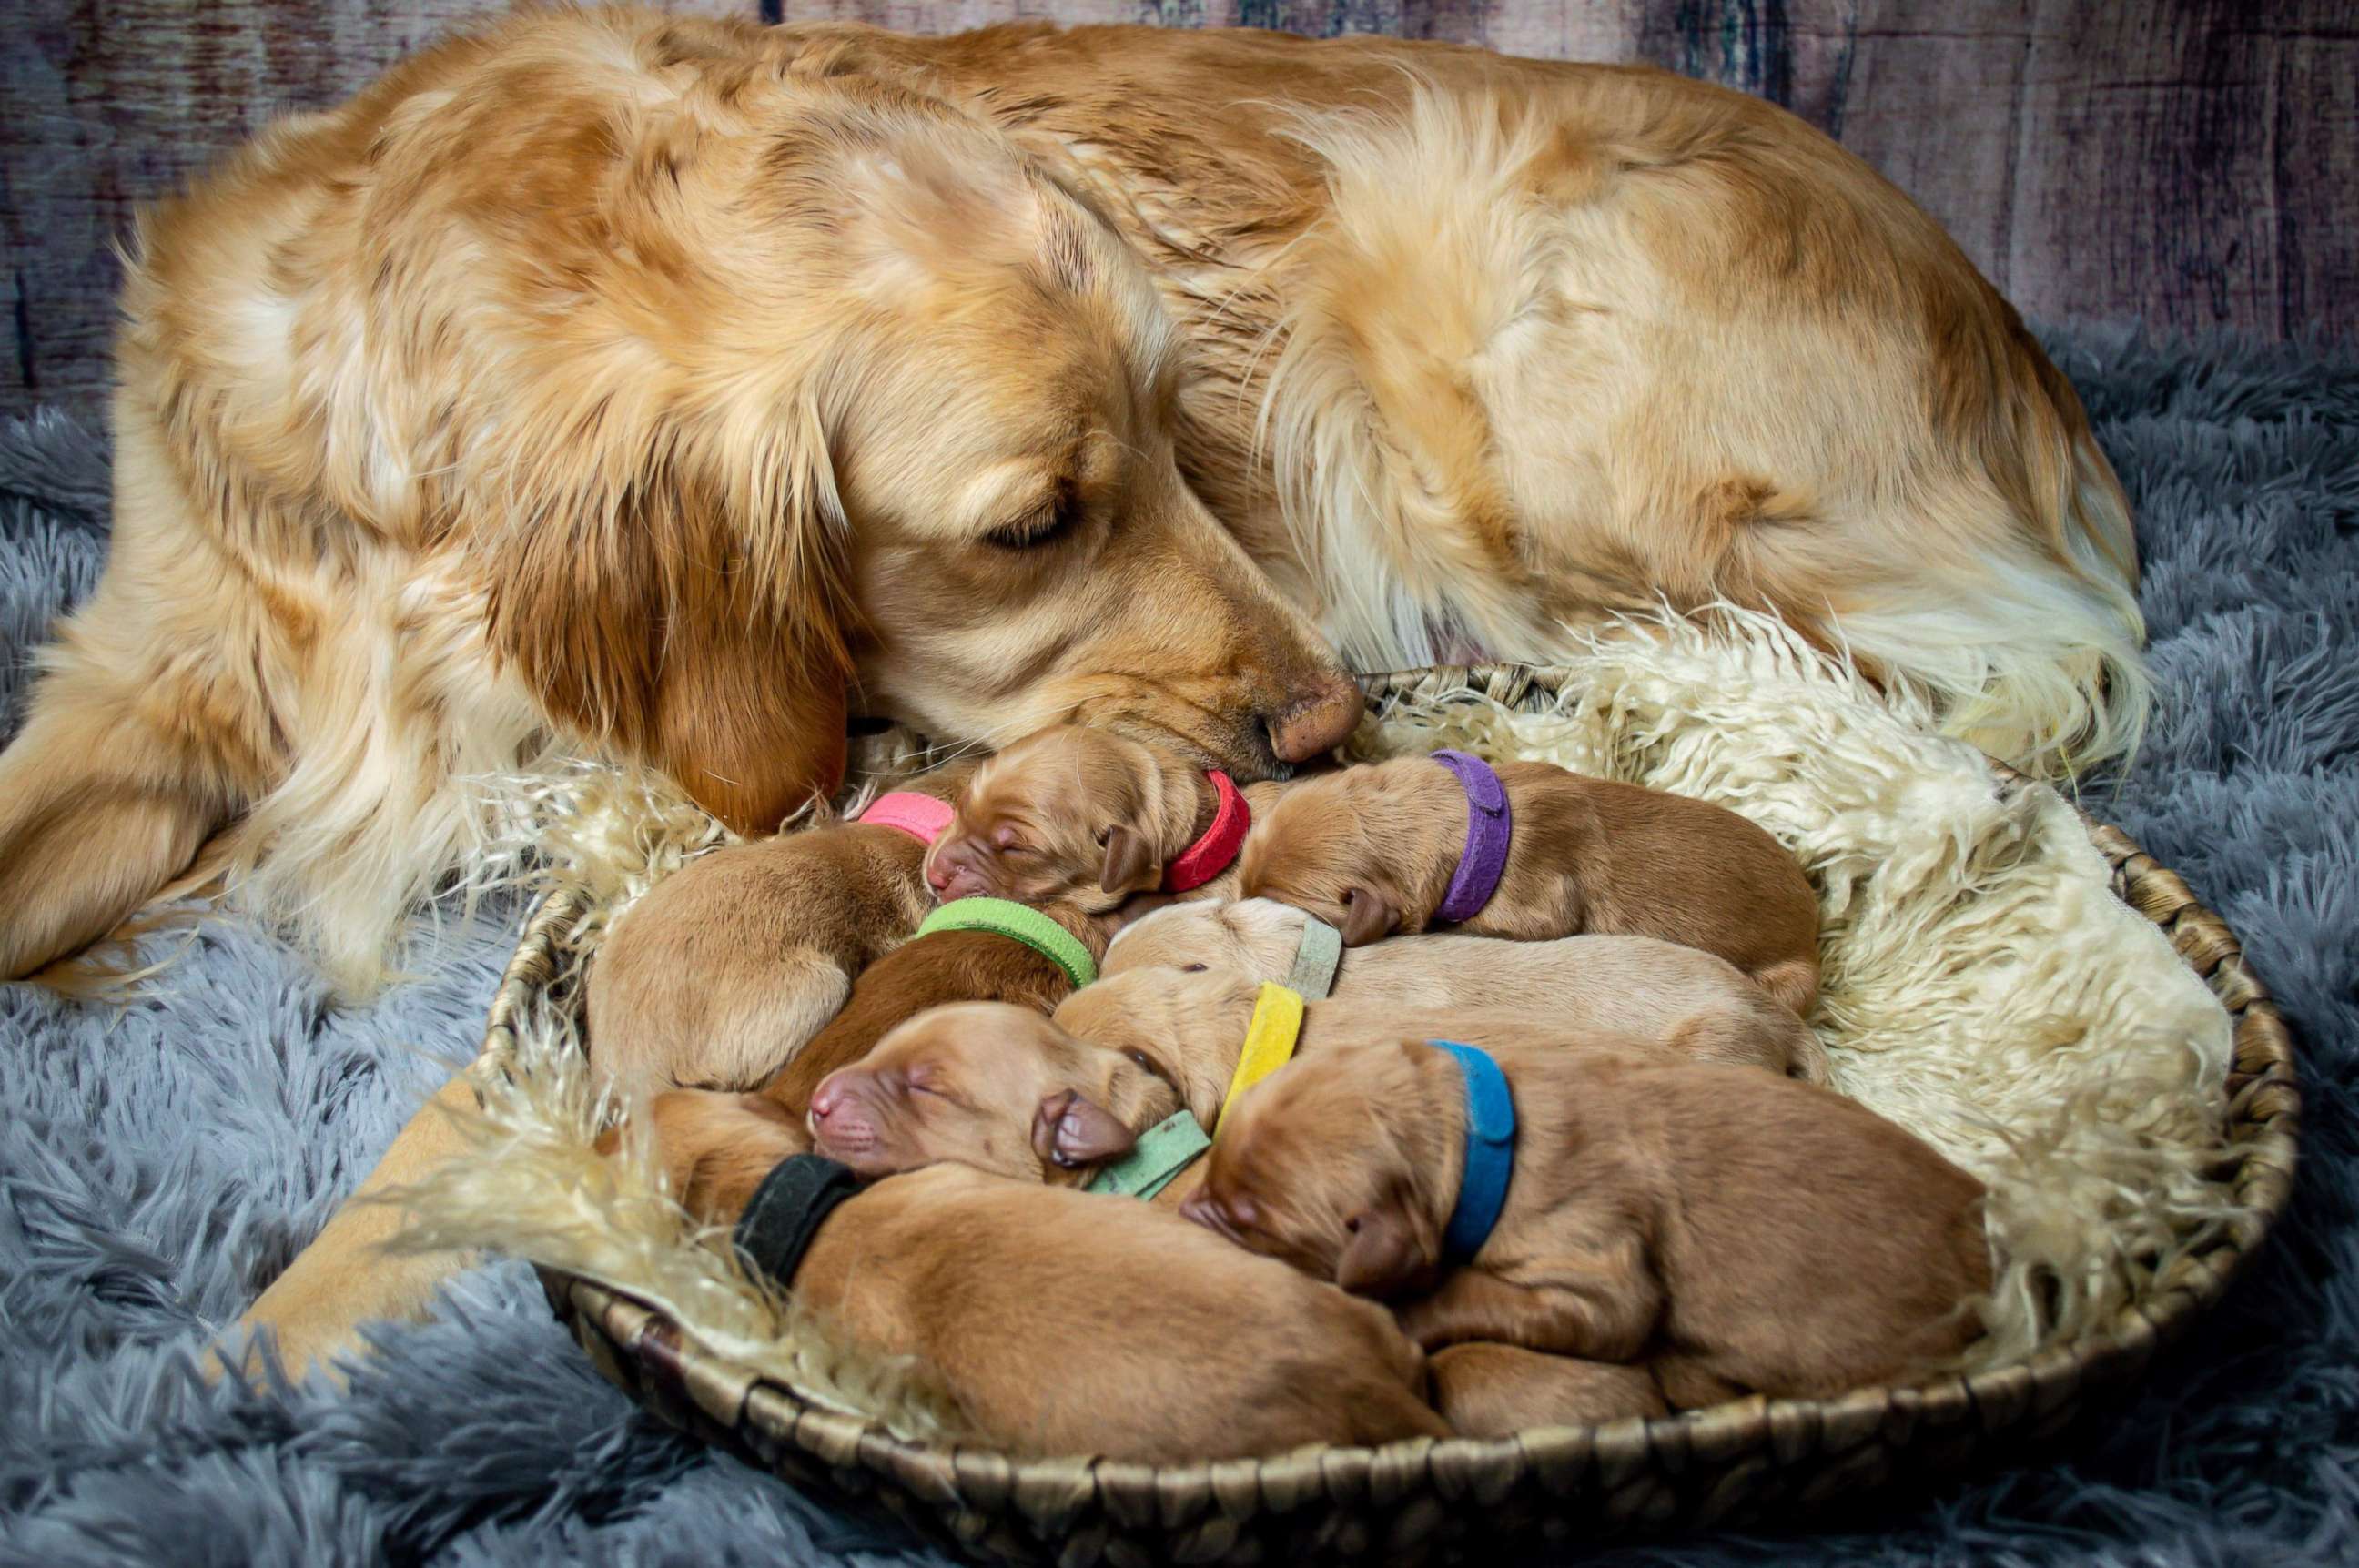 PHOTO: Chelsie Garrels of Montana, recently snapped images of her Golden Retriever Kodie and her new puppies.